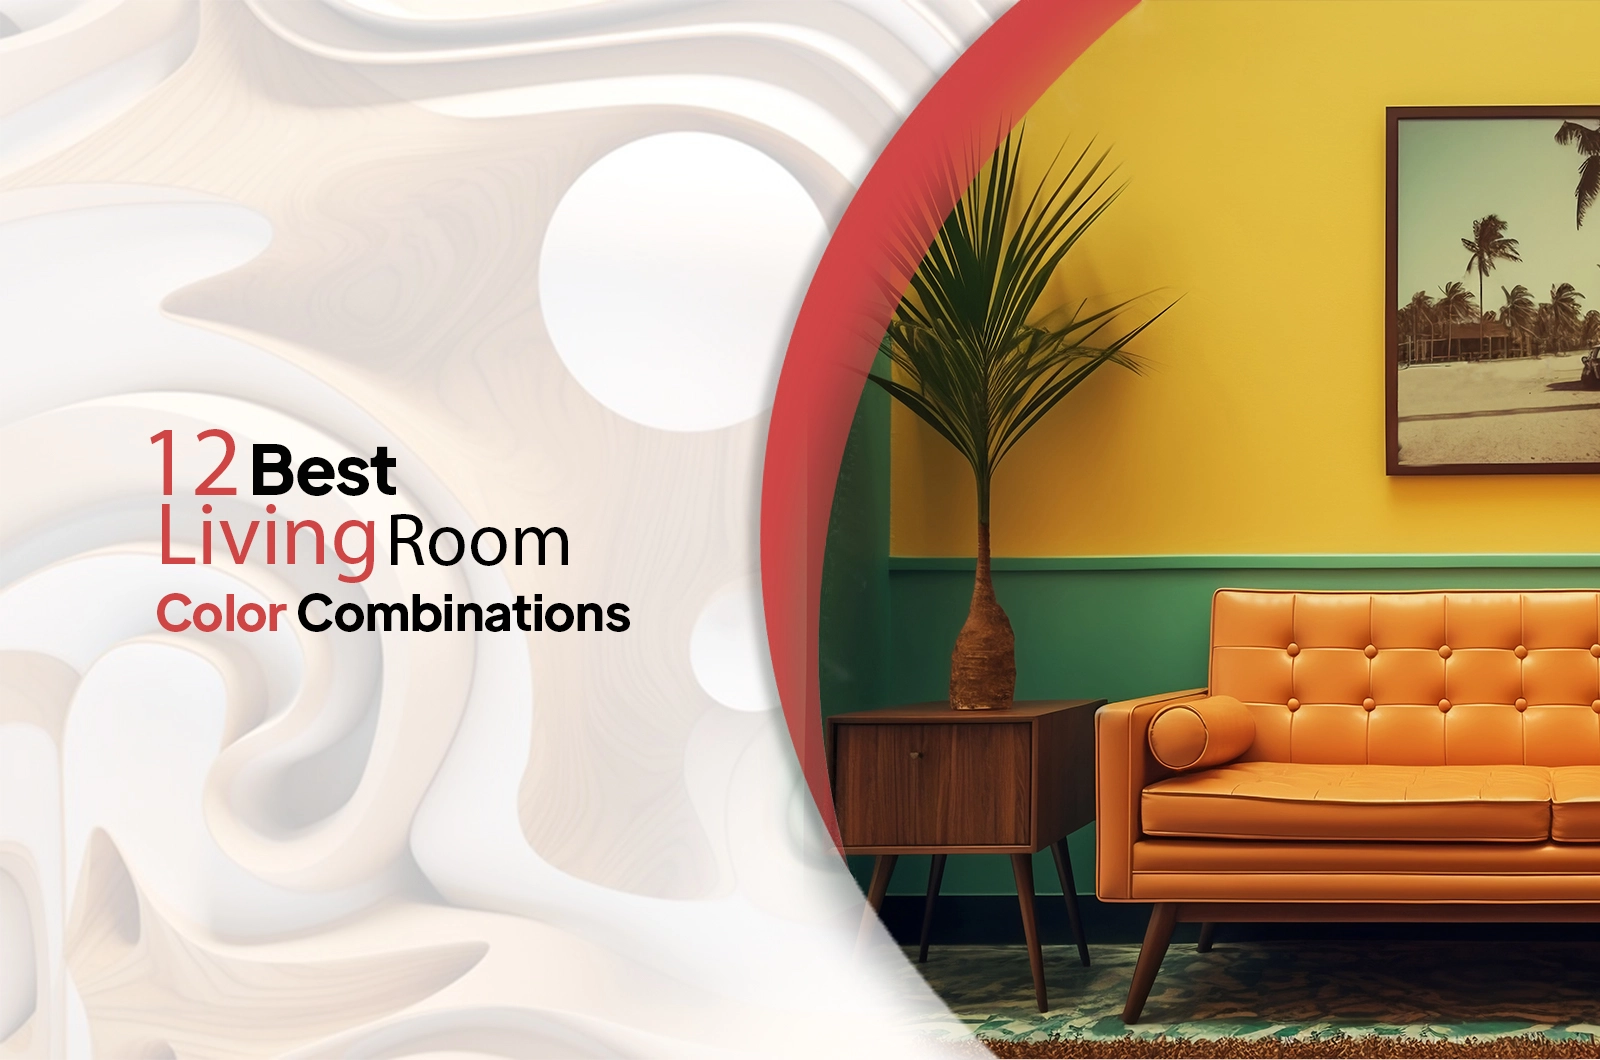 12 Best Living Room Color Combinations for 2023: Guide